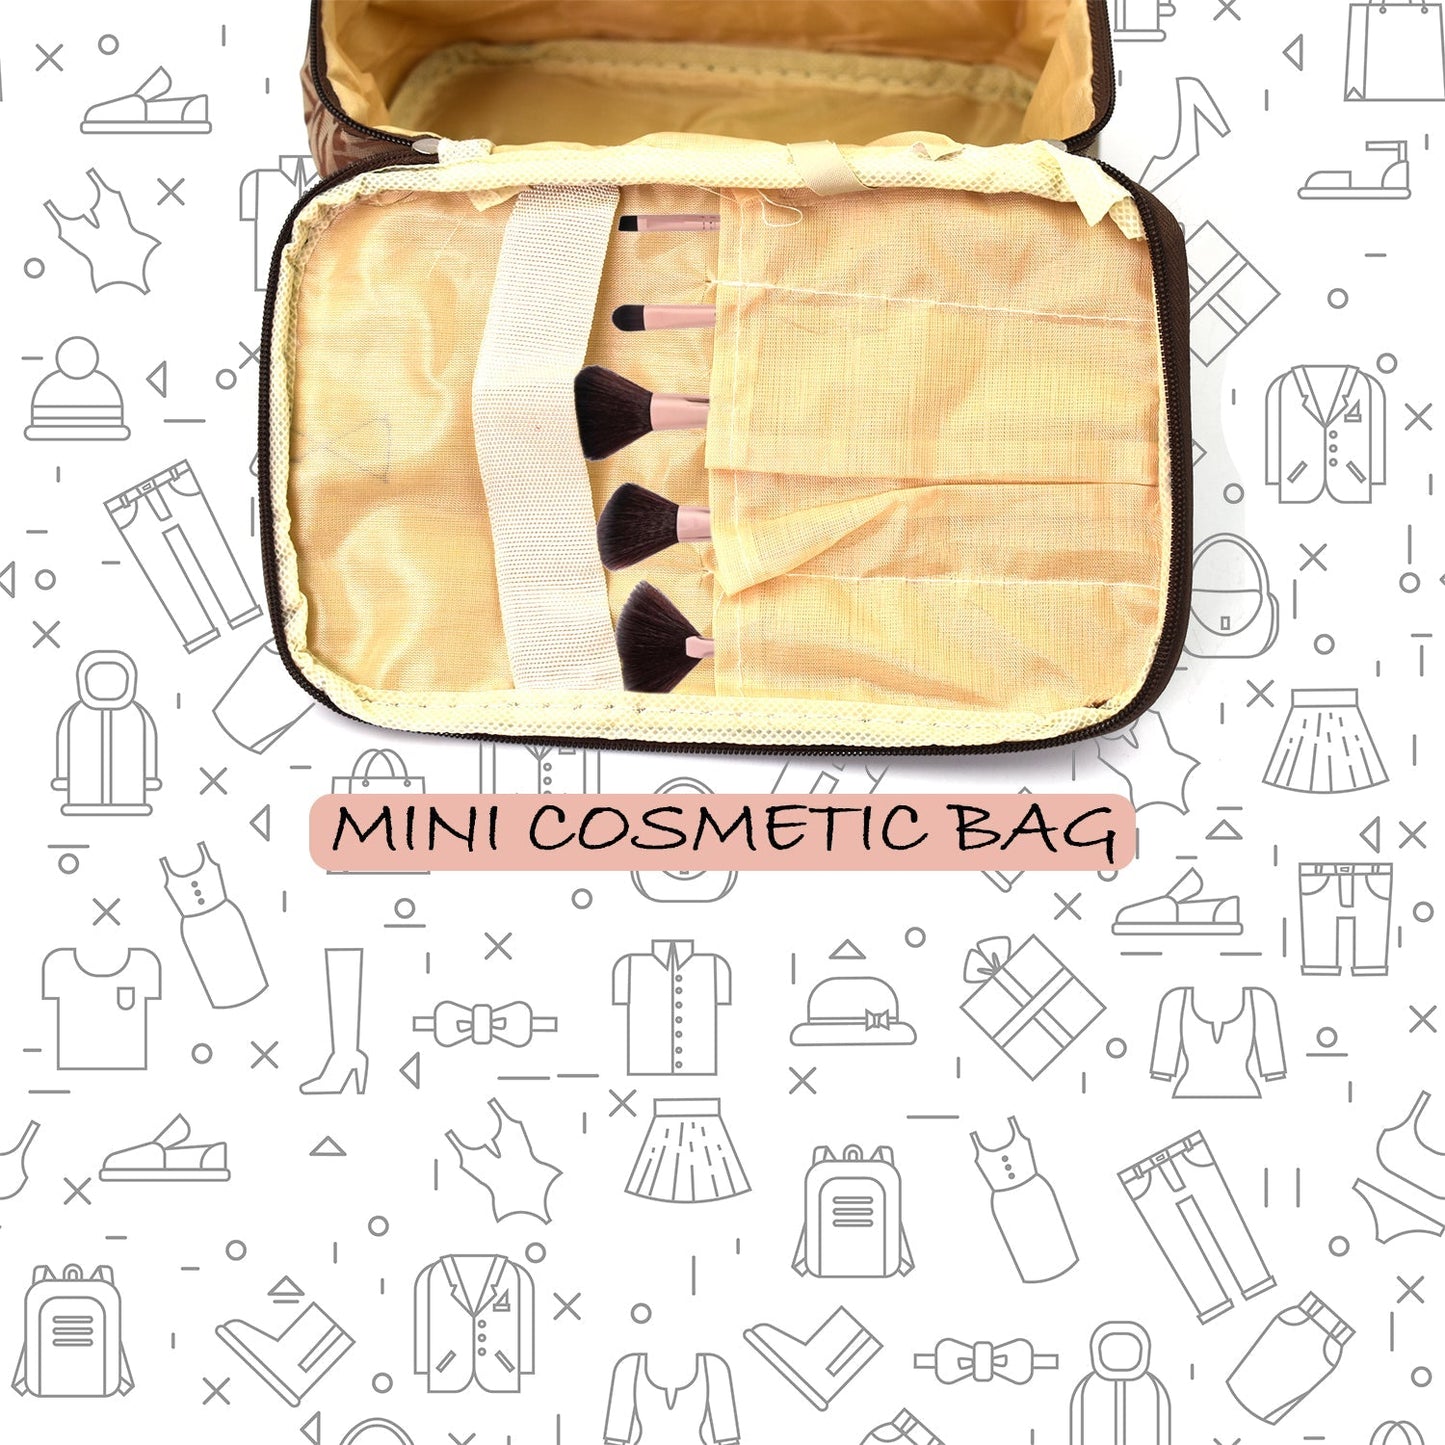 Portable Makeup Bag for storing makeup equipment’s while travelling